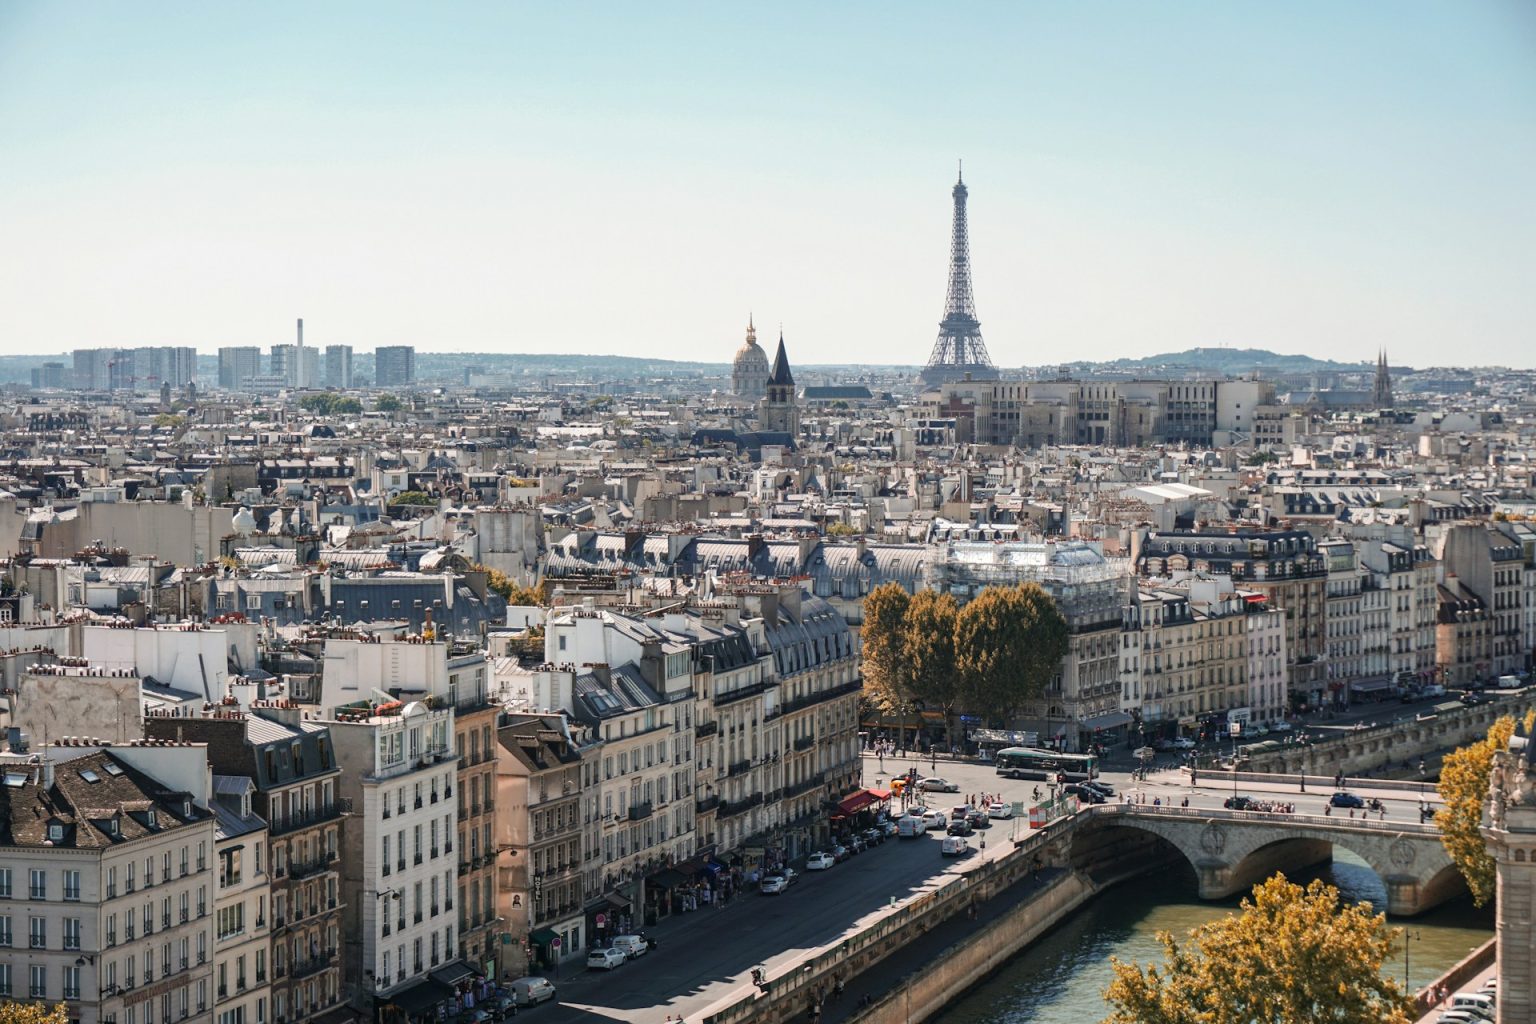 A photo of the rooftops of the city of paris with the eiffel tower in the background.